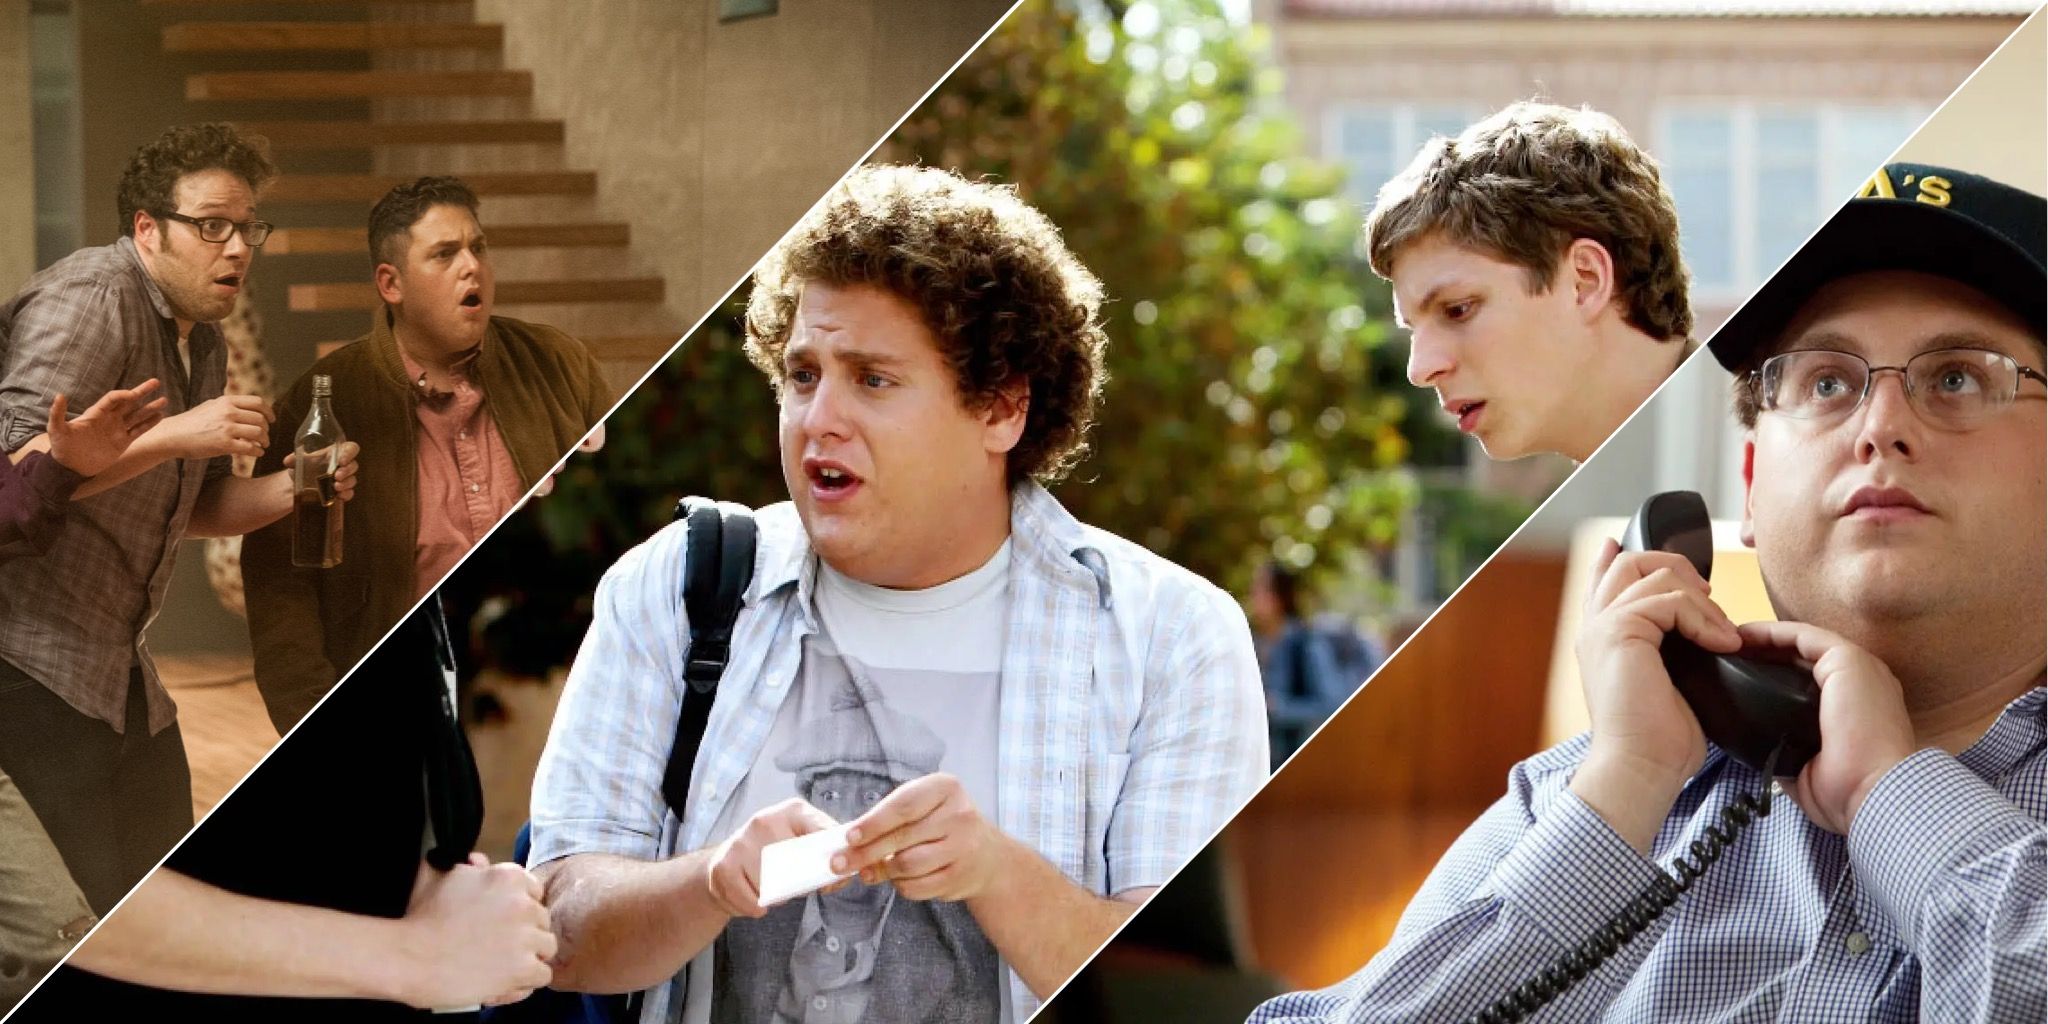 The 10 Highest Rated Jonah Hill Movies, According to Rotten Tomatoes